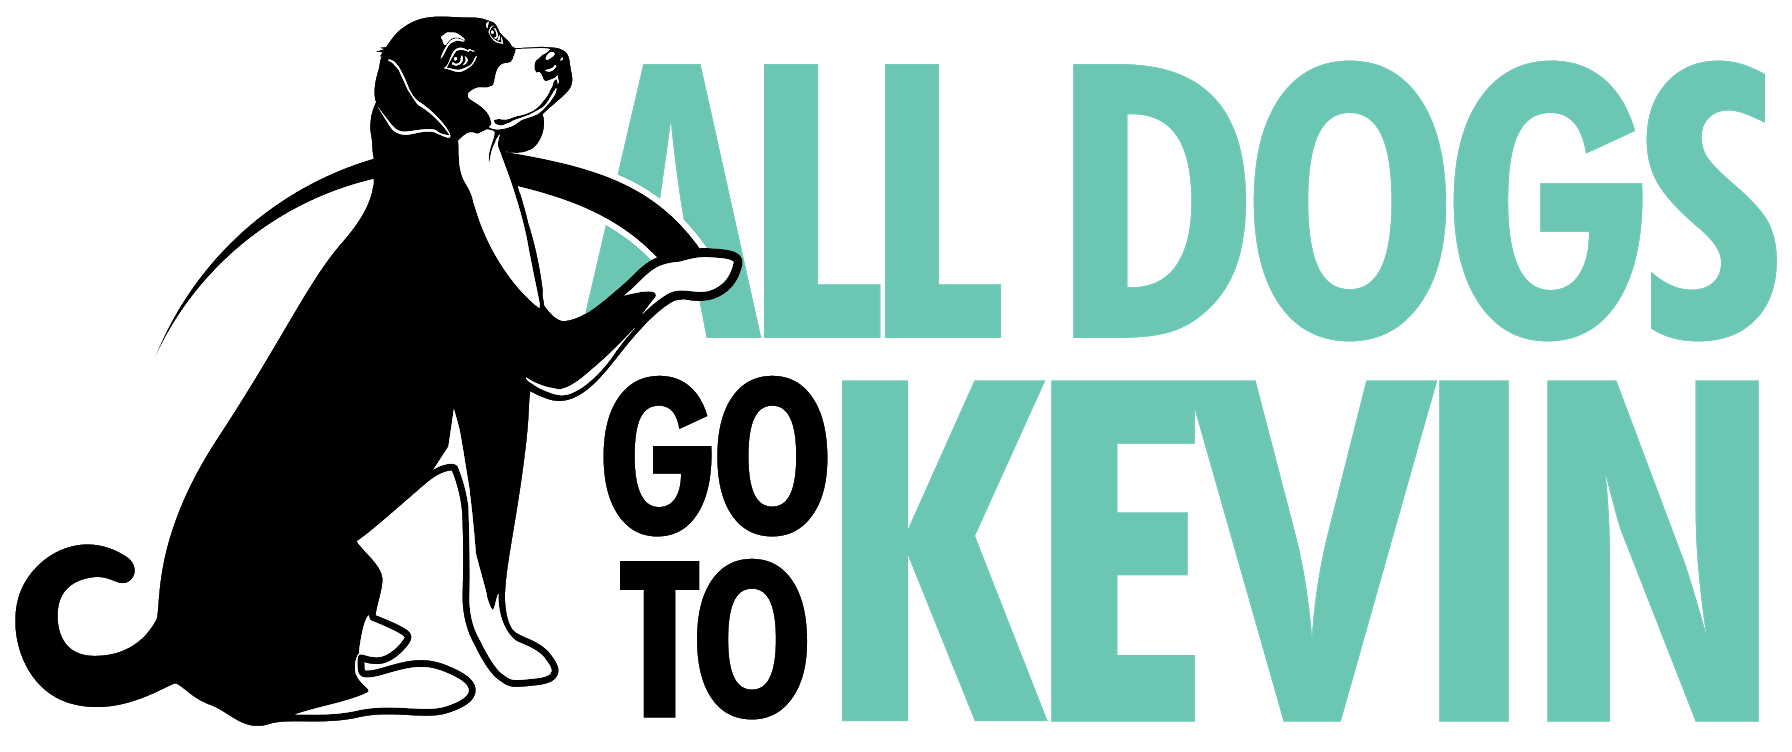 All Dogs go to Kevin